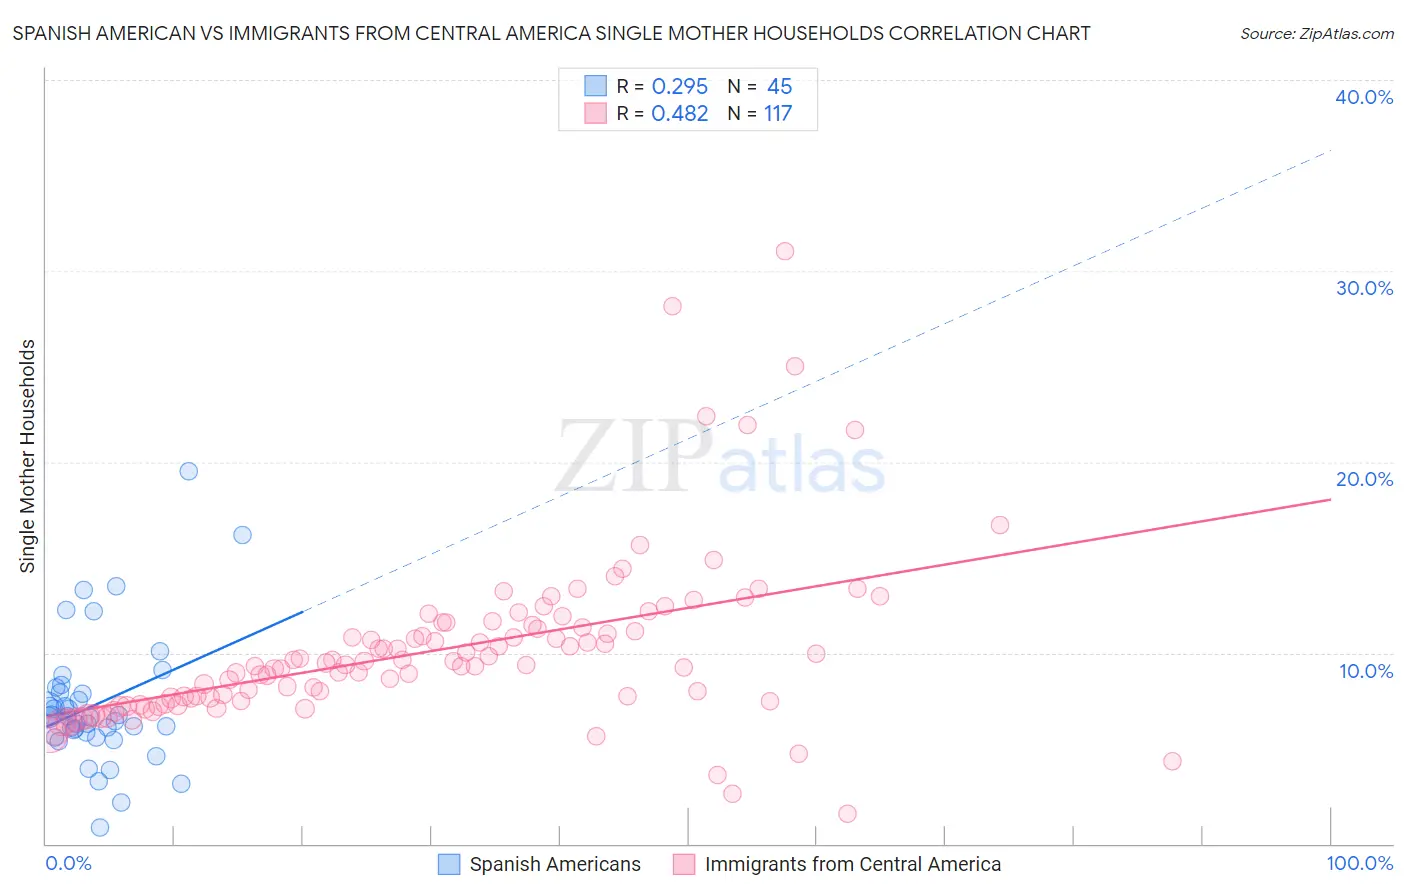 Spanish American vs Immigrants from Central America Single Mother Households